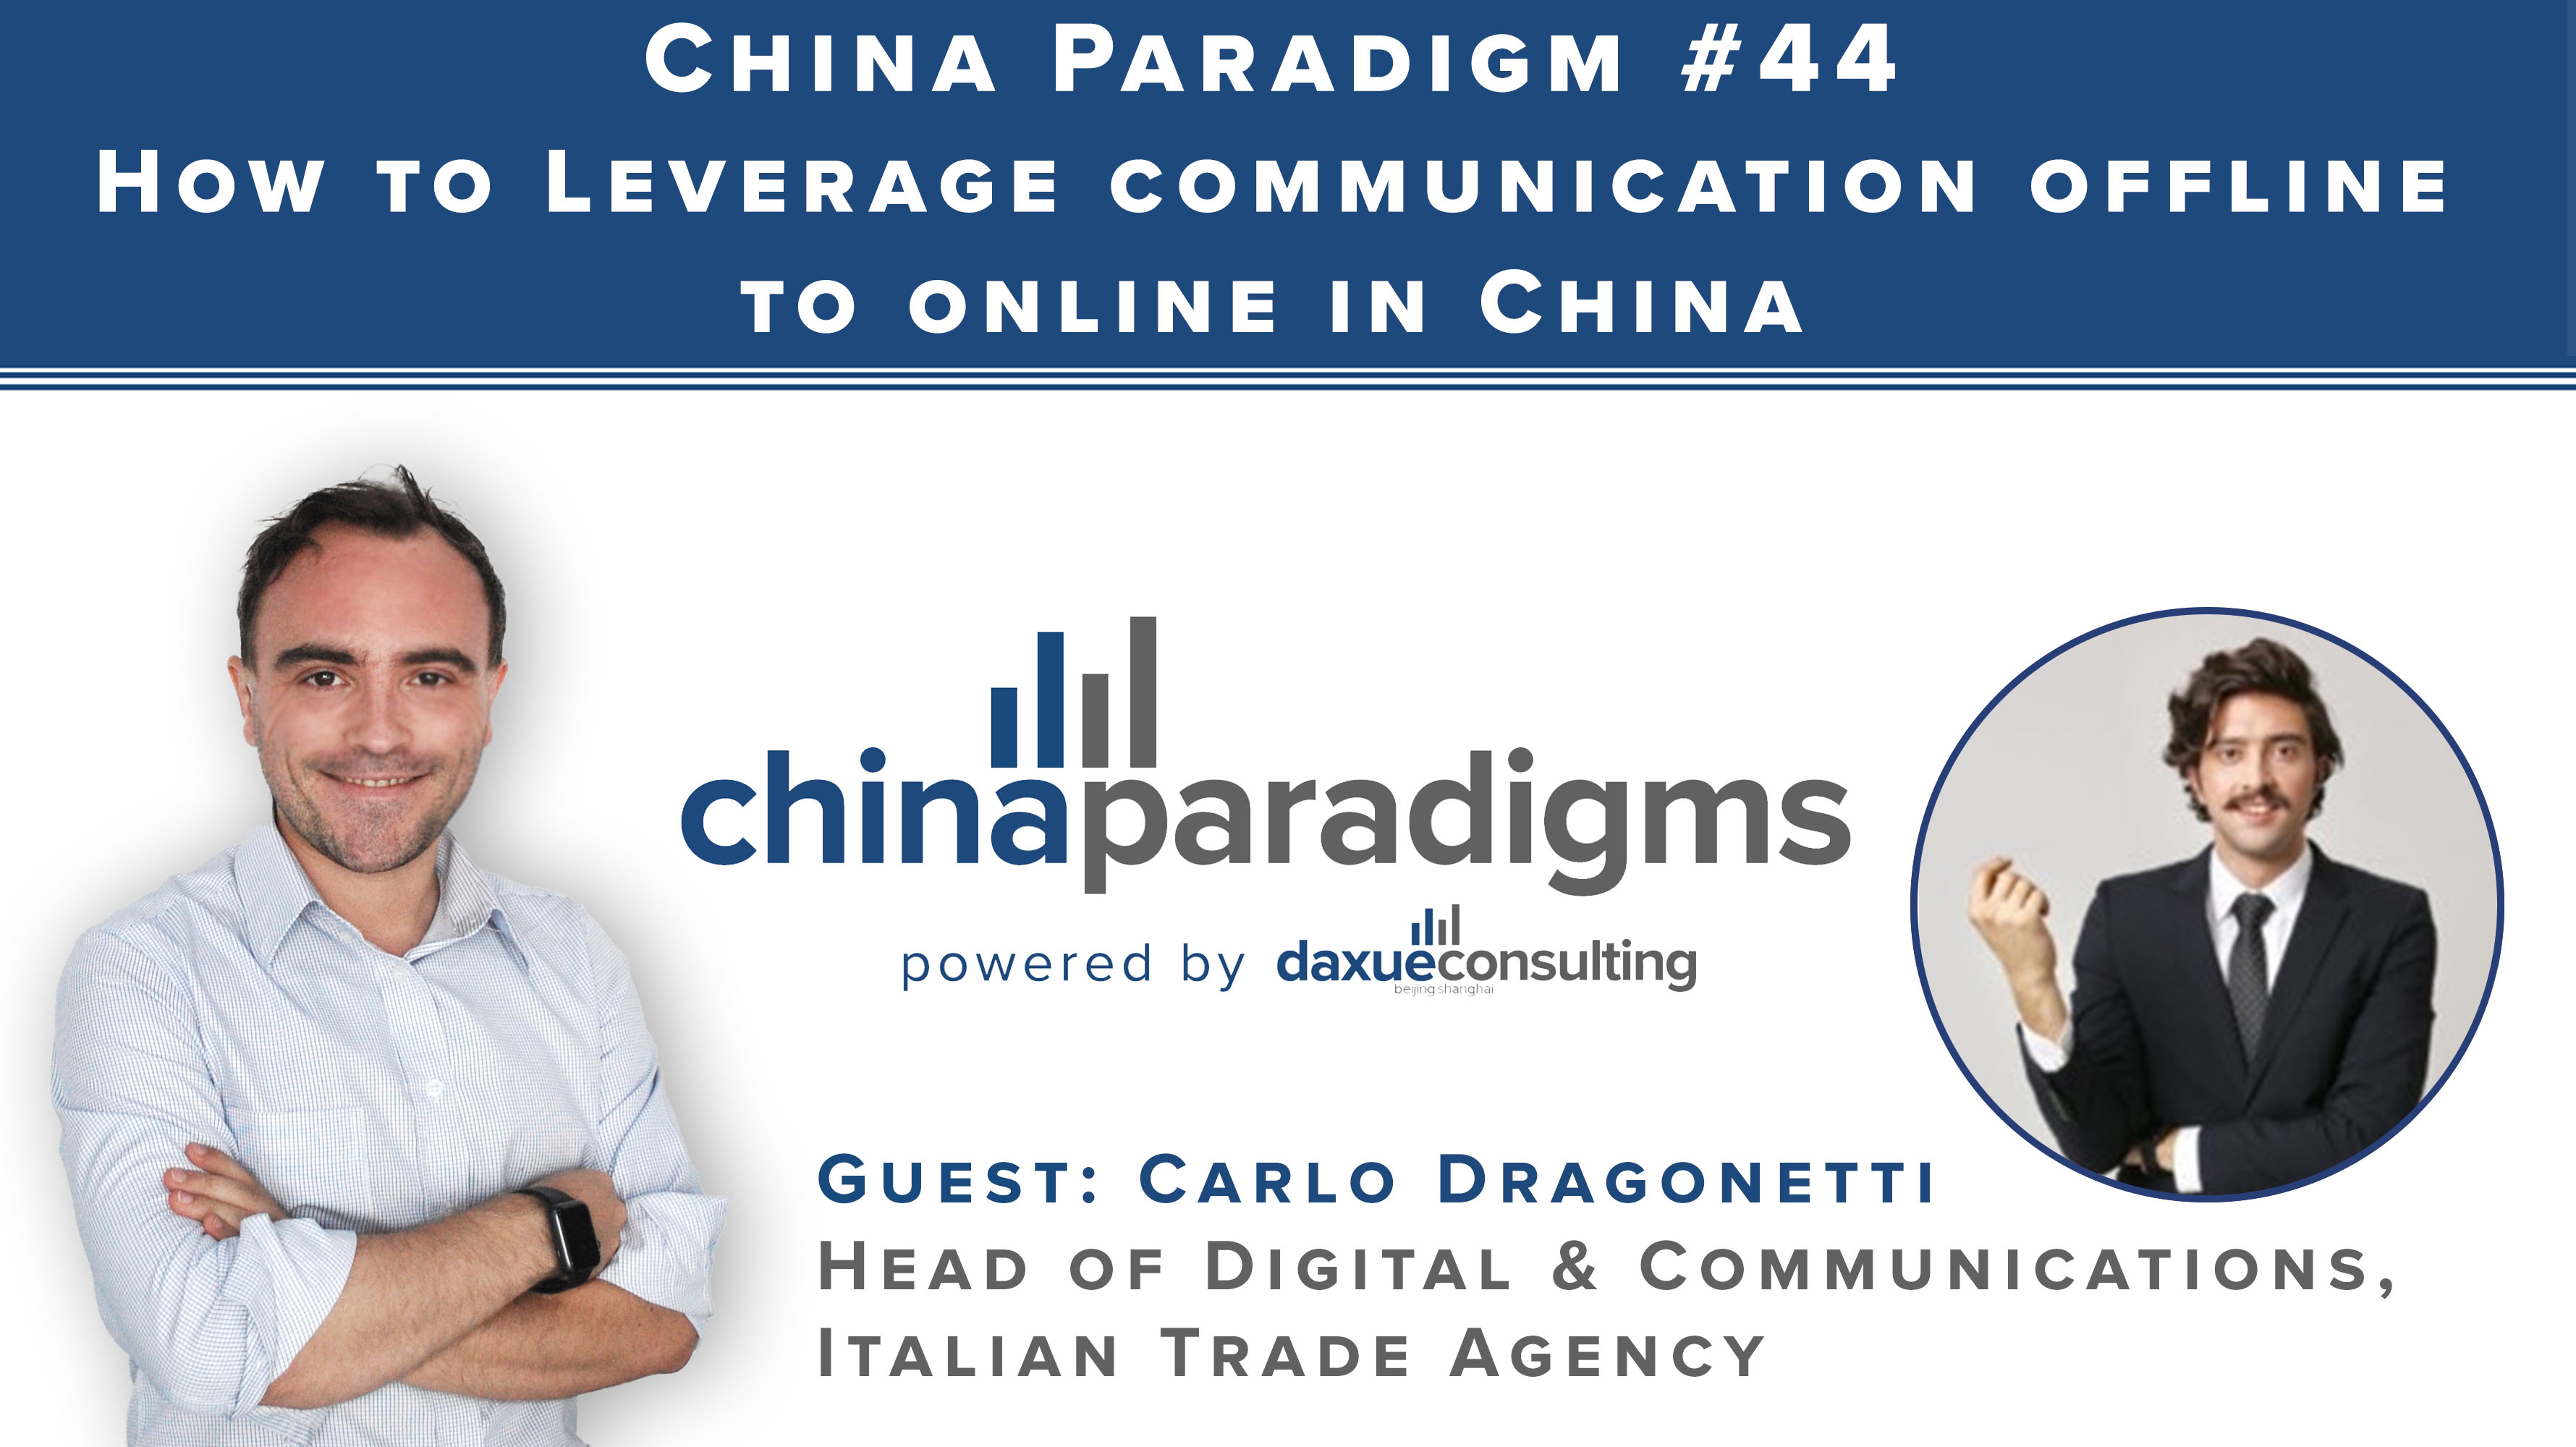 [Podcast] China Paradigm 44: How to leverage offline to online communication in China